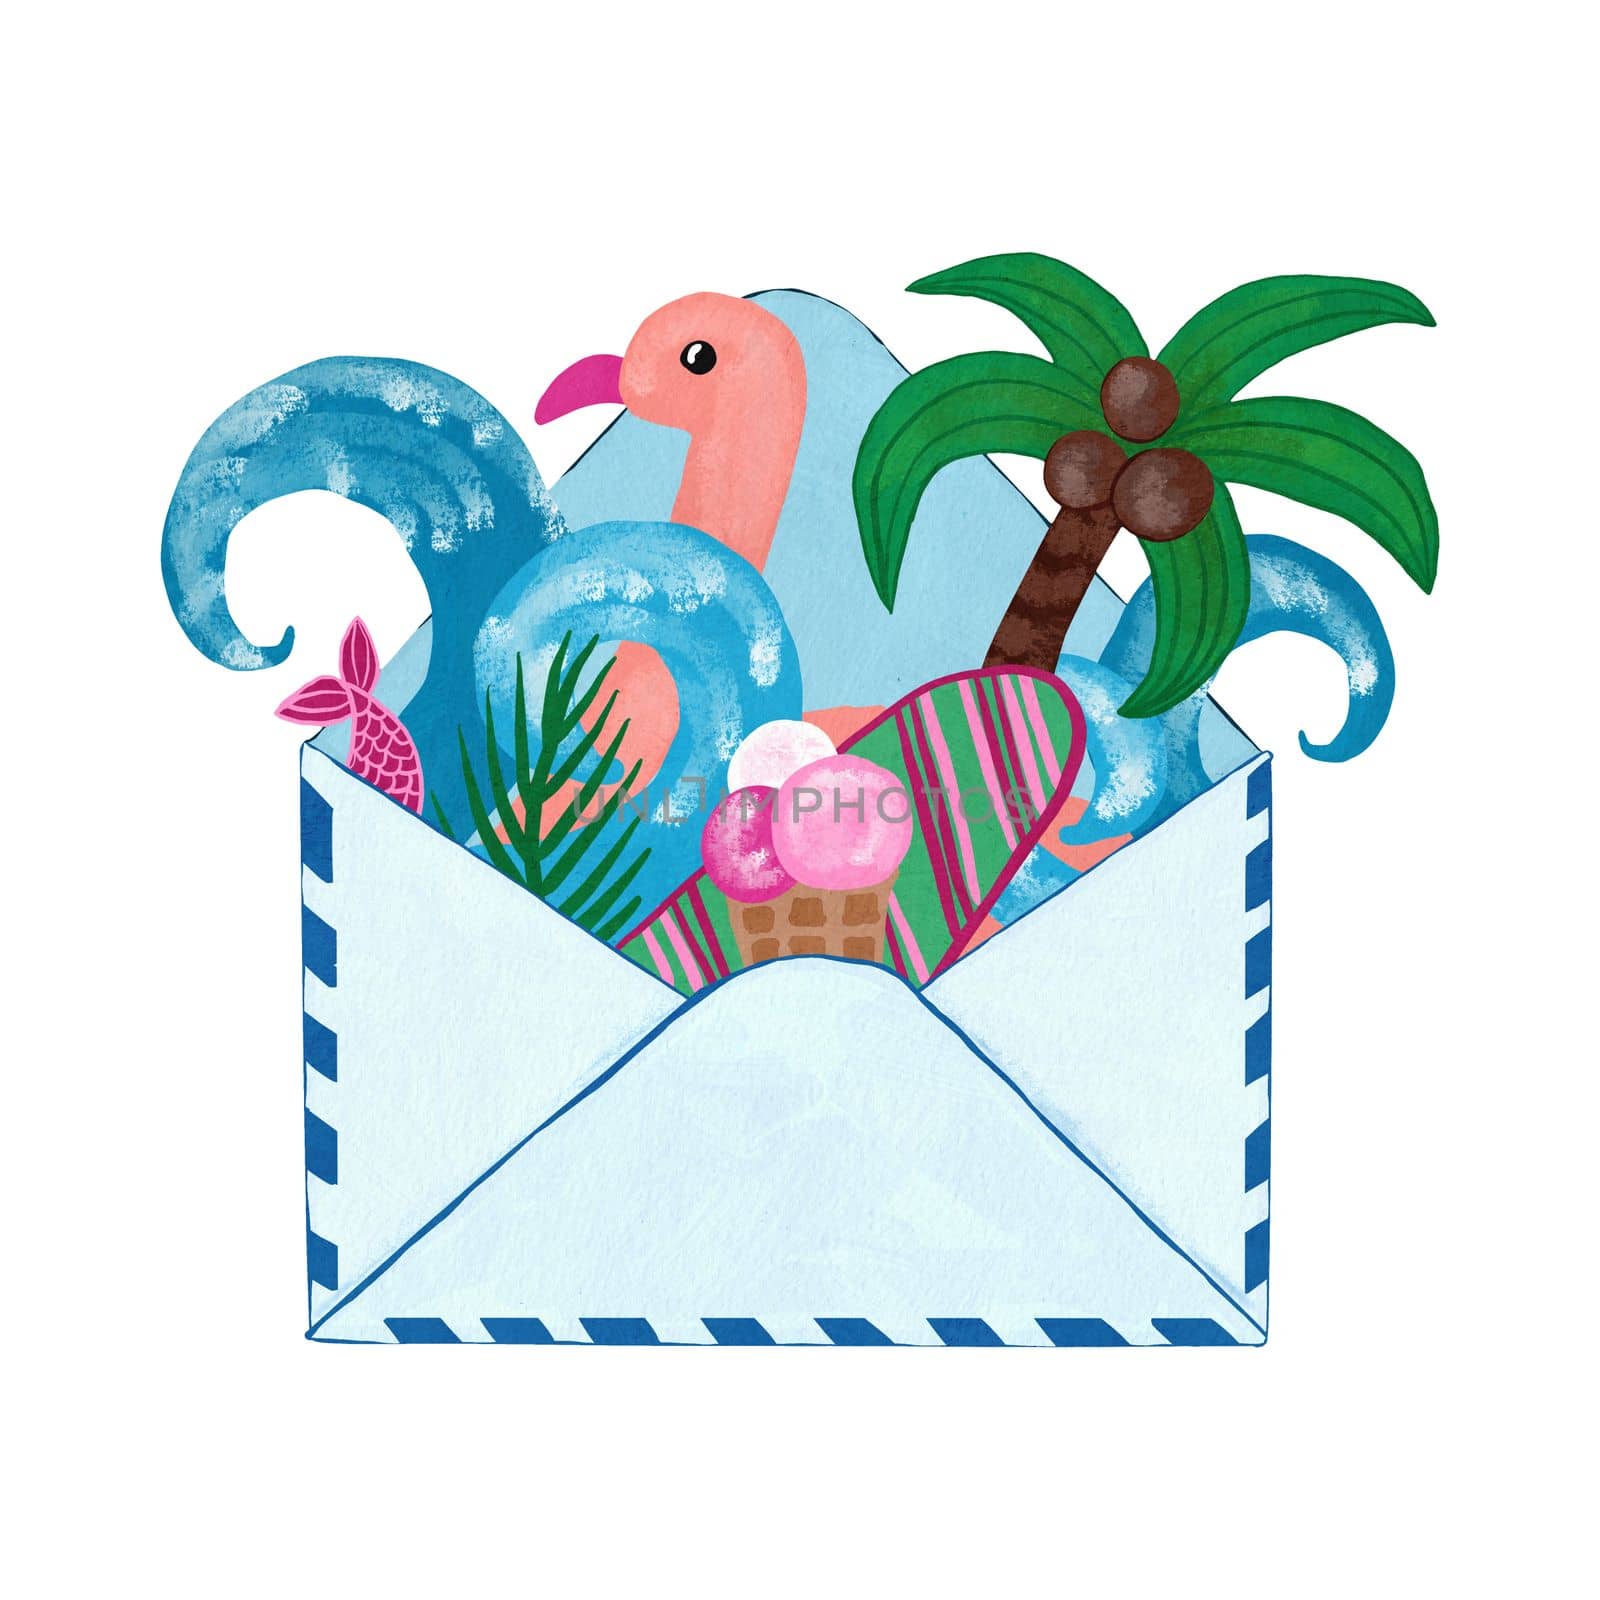 Hand drawn illustration of open letter envelope mailing list, sending business information invitation card. Summer sea ocean vacation tourism, palm blue waves ice cream, flamingo relaxation surf concept